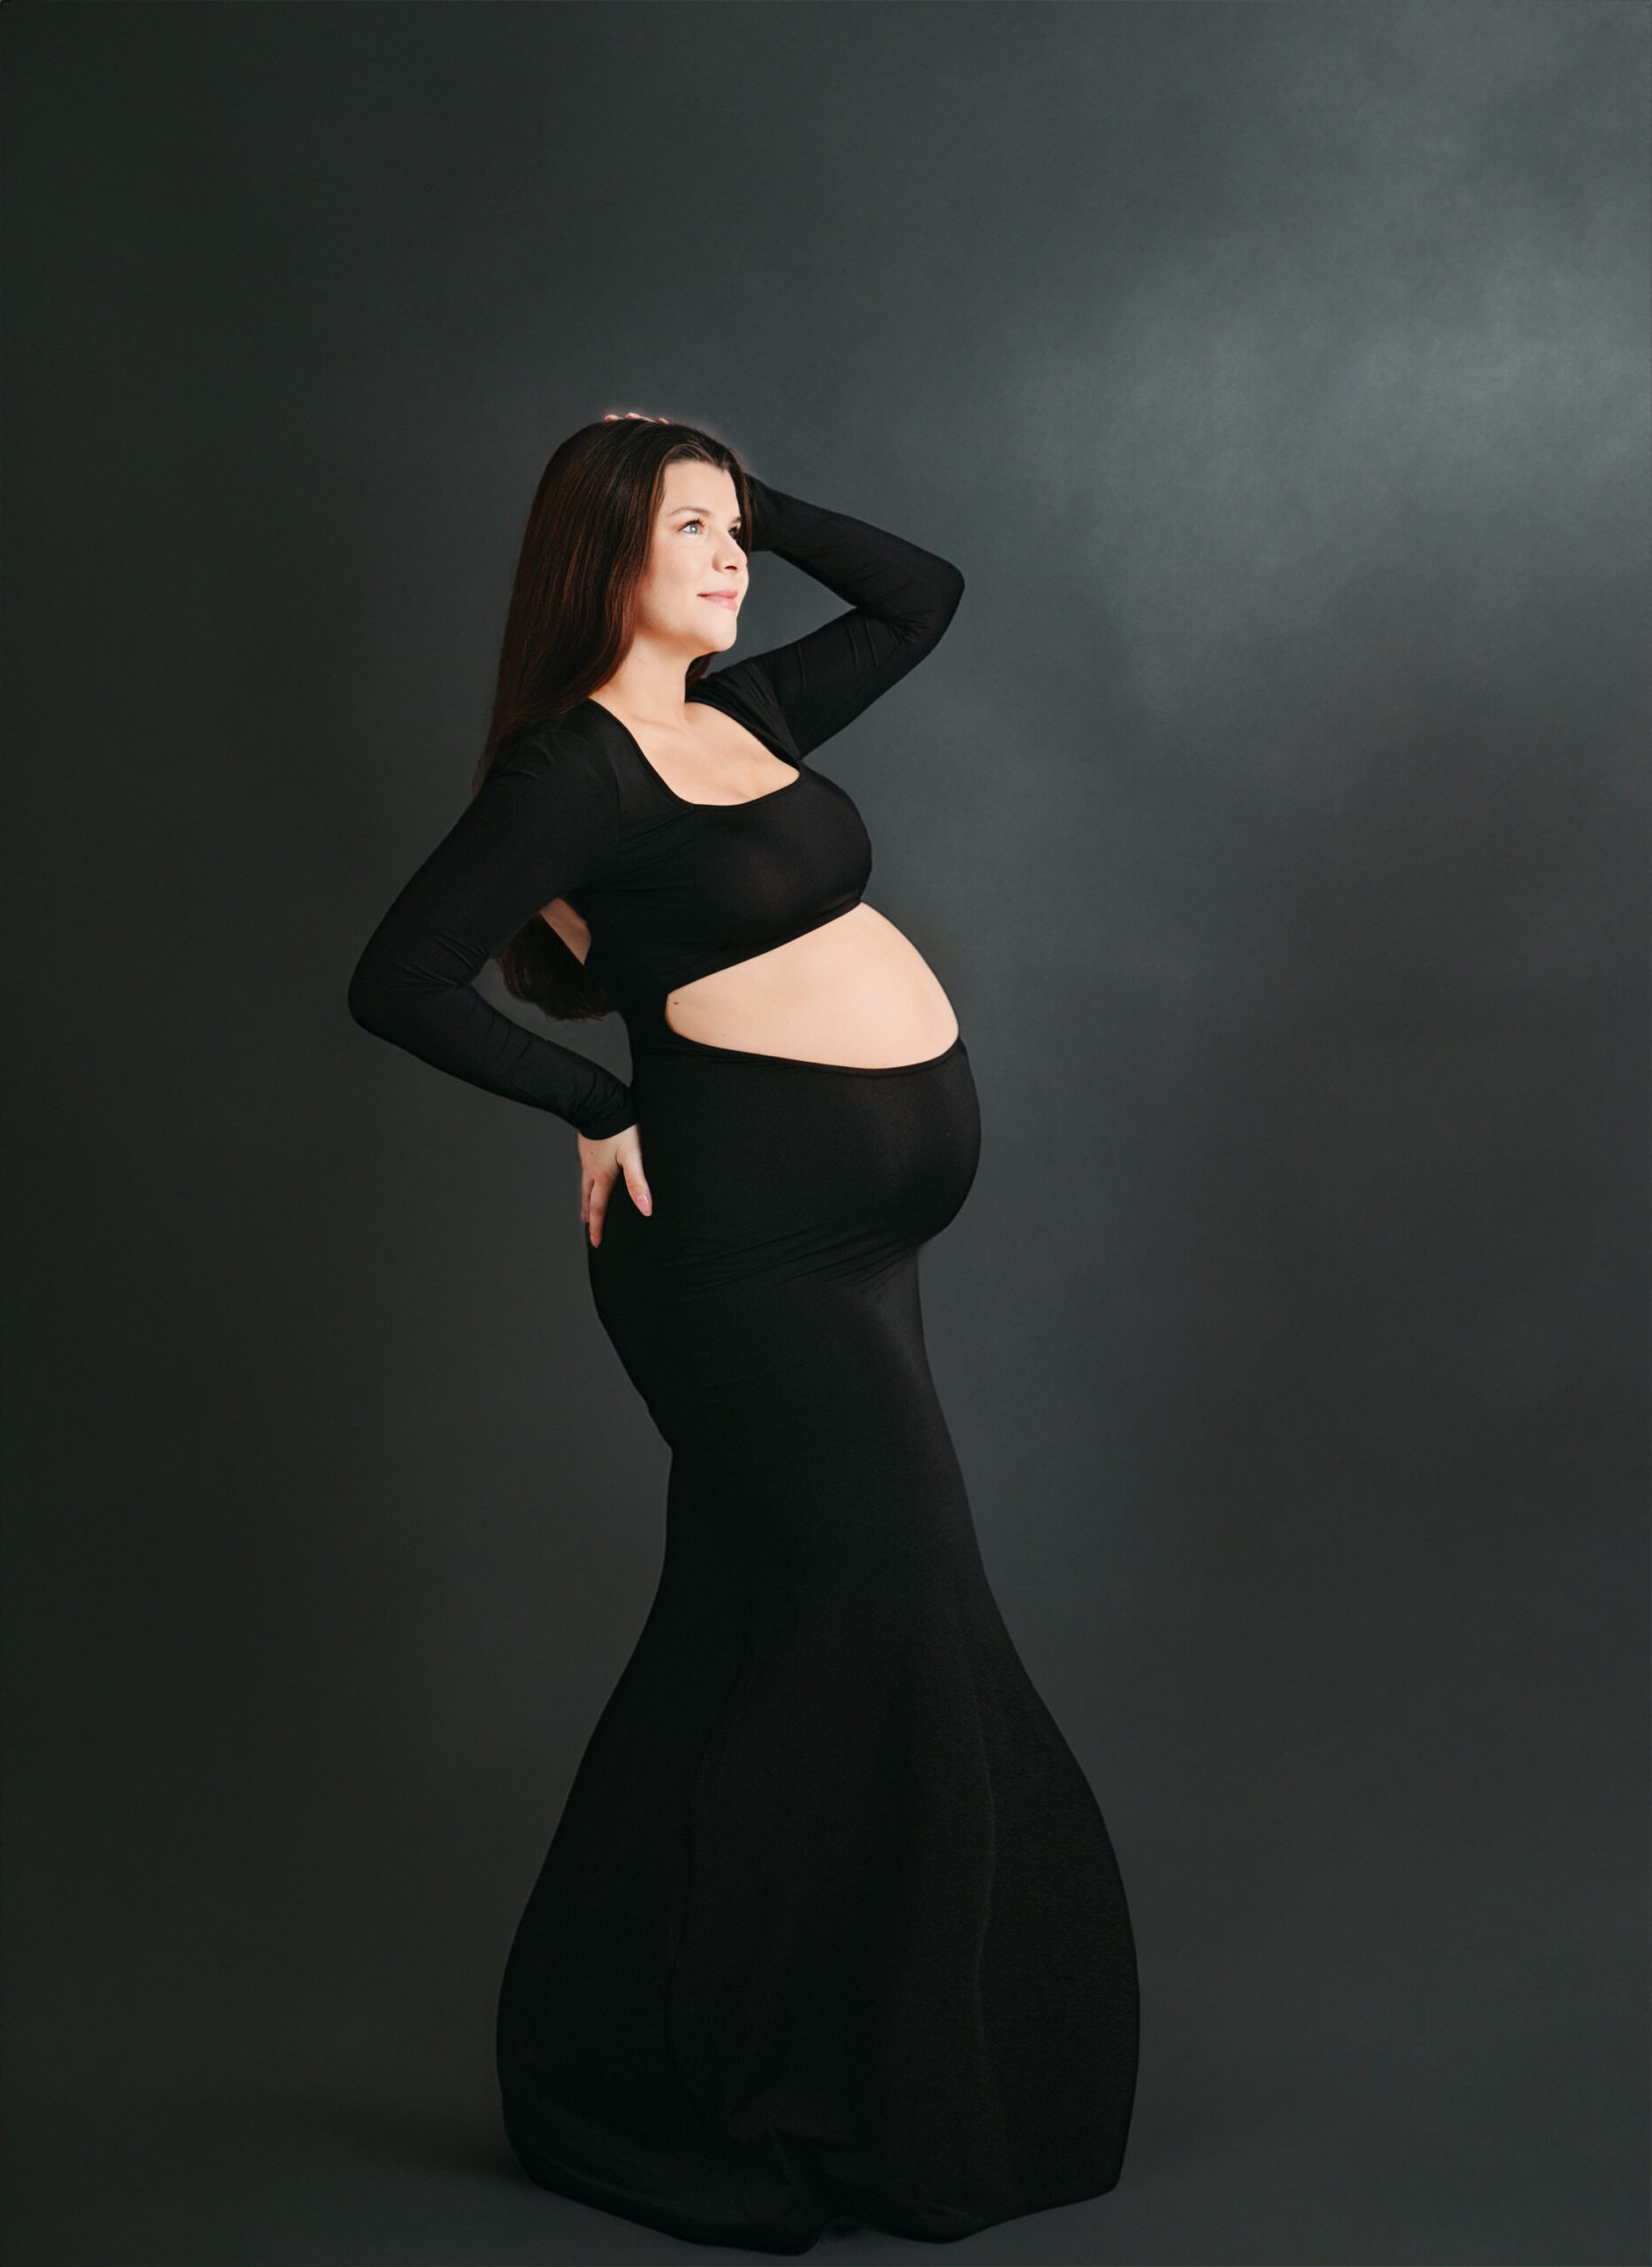 Studio portrait of an expectant mother wearing an elegant gown, showcasing her pregnancy glow